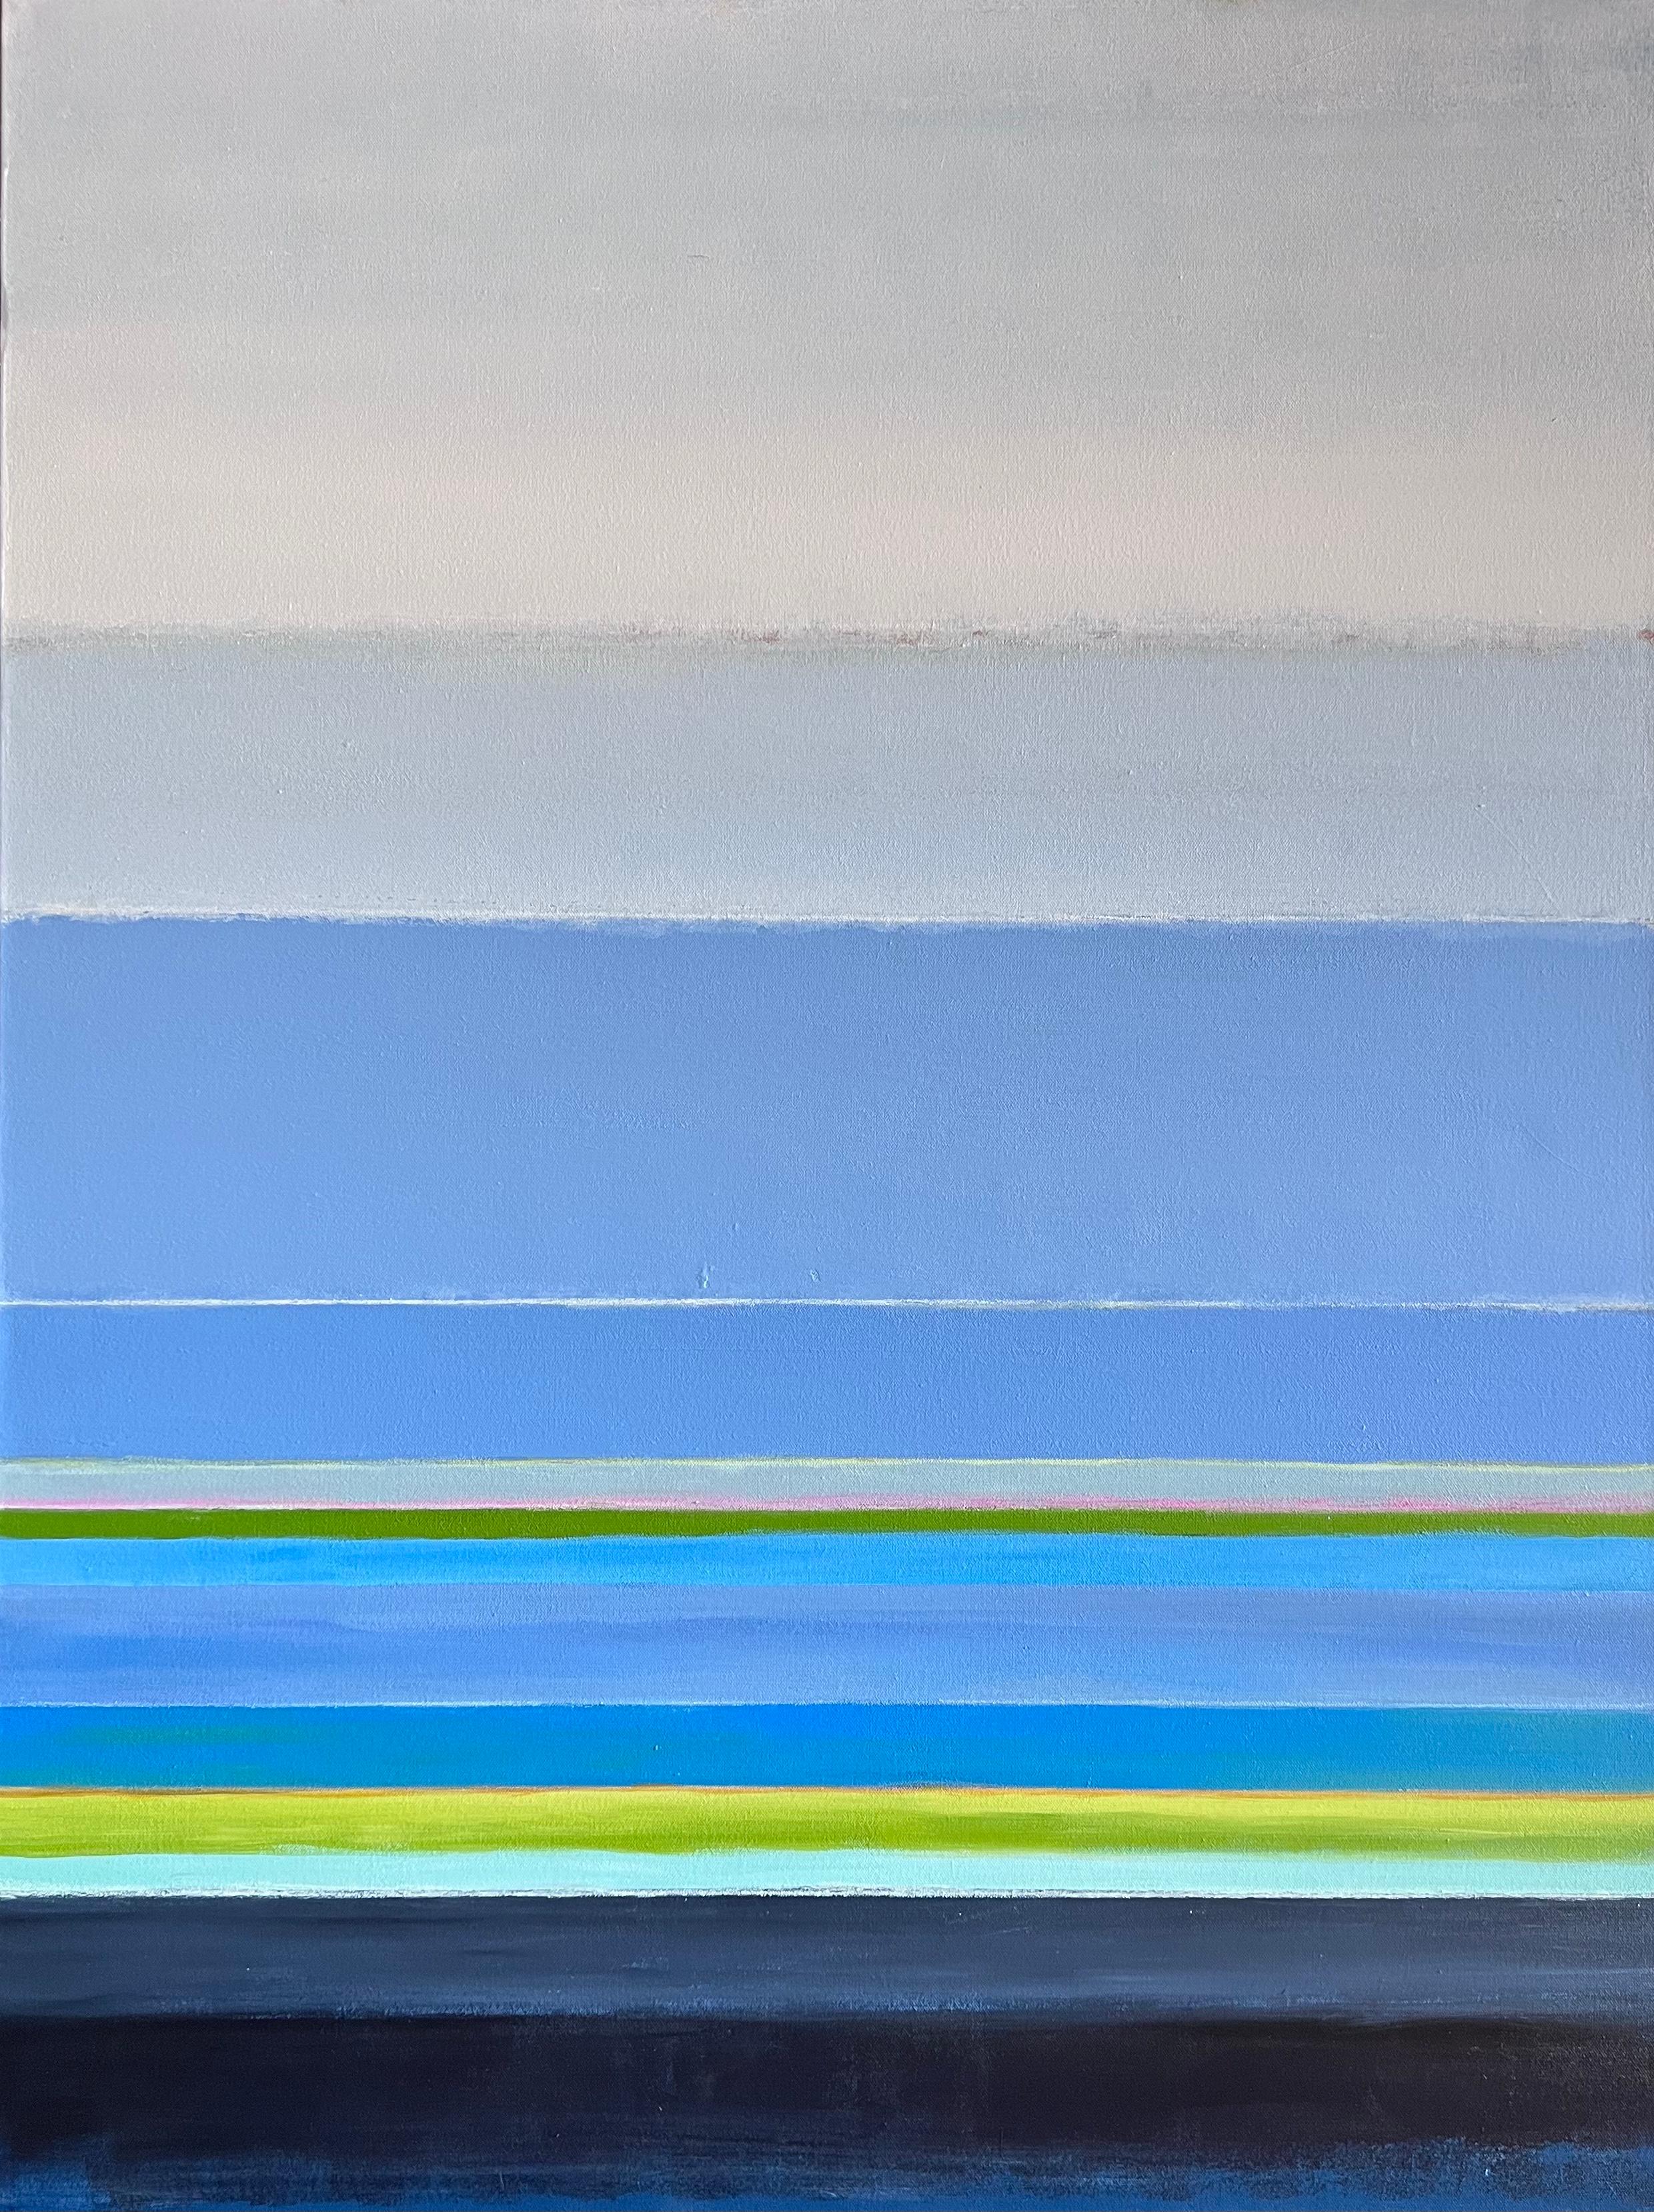 Of the Same Stripe (Abstract, Geometric, Pattern, Waterscape, Skyscape, Blue) - Painting by Kelley Carman